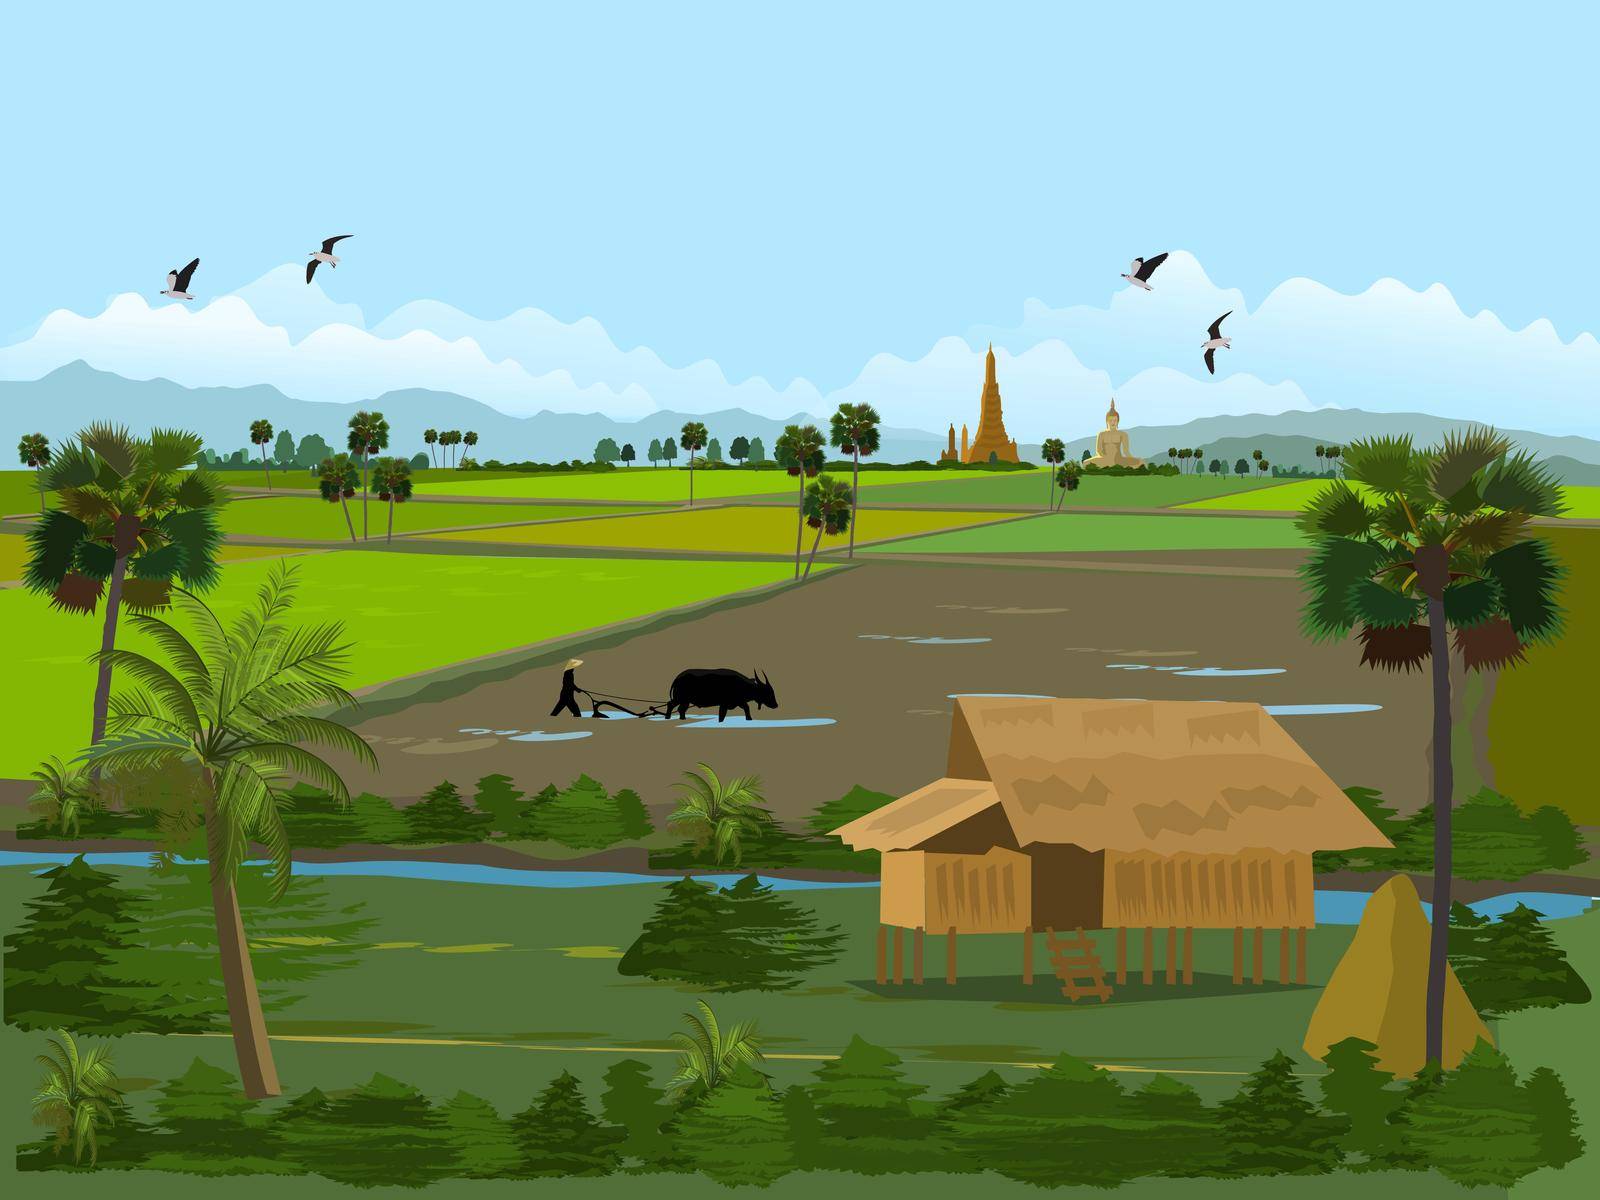 Rice fields in Thailand. Farmers' houses in green fields. Farmers plowing fields with sugar palm trees, rice fields, mountains, Buddhist temples and sky as the background.